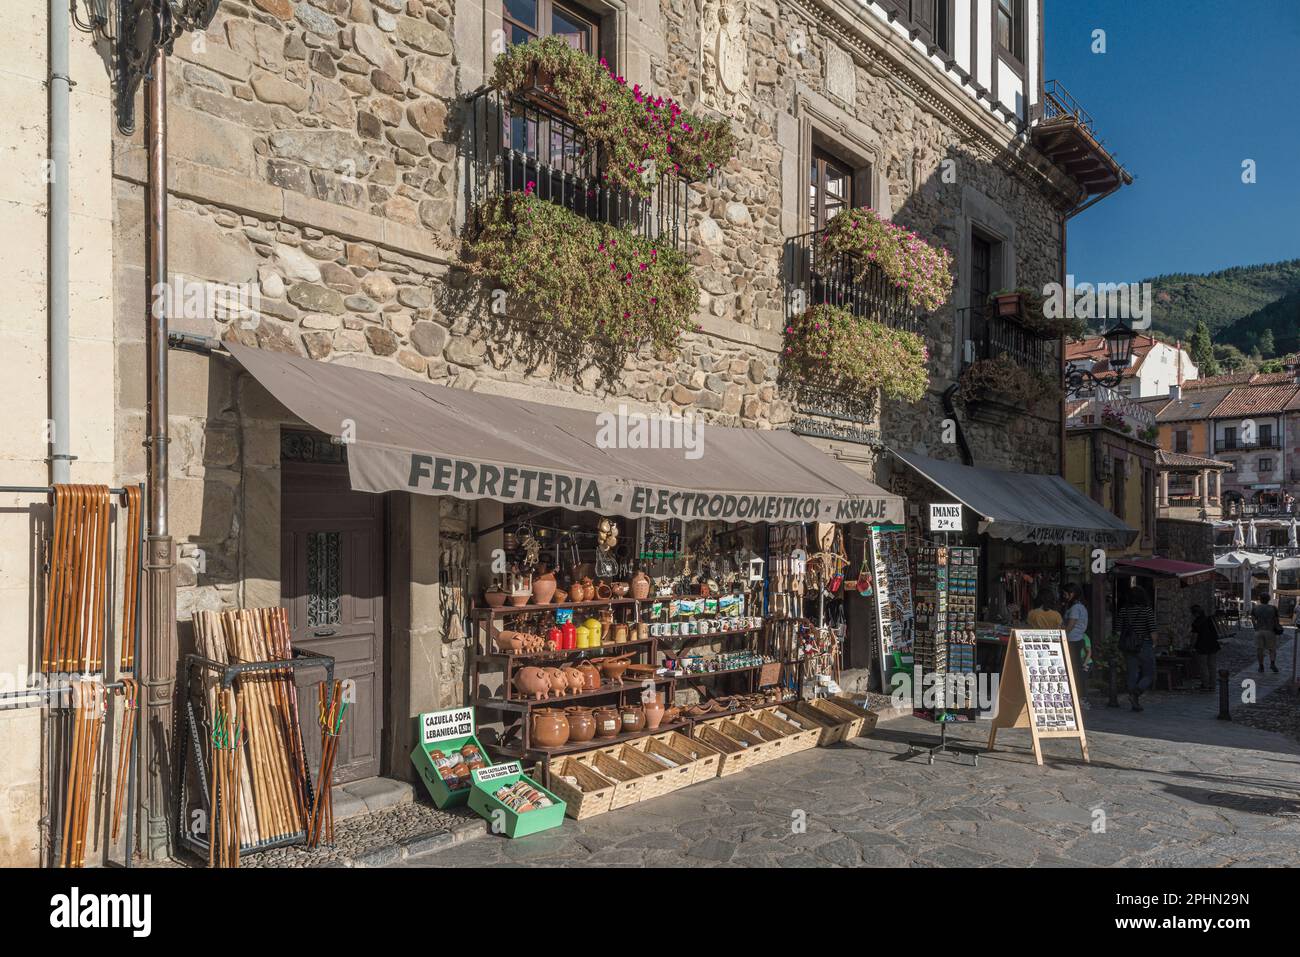 Hardware store electrical appliances, kitchenware, crafts, forging, basketry, souvenir, Gutierrez Fernandez in the town of Potes, Cantabria, Spain. Stock Photo